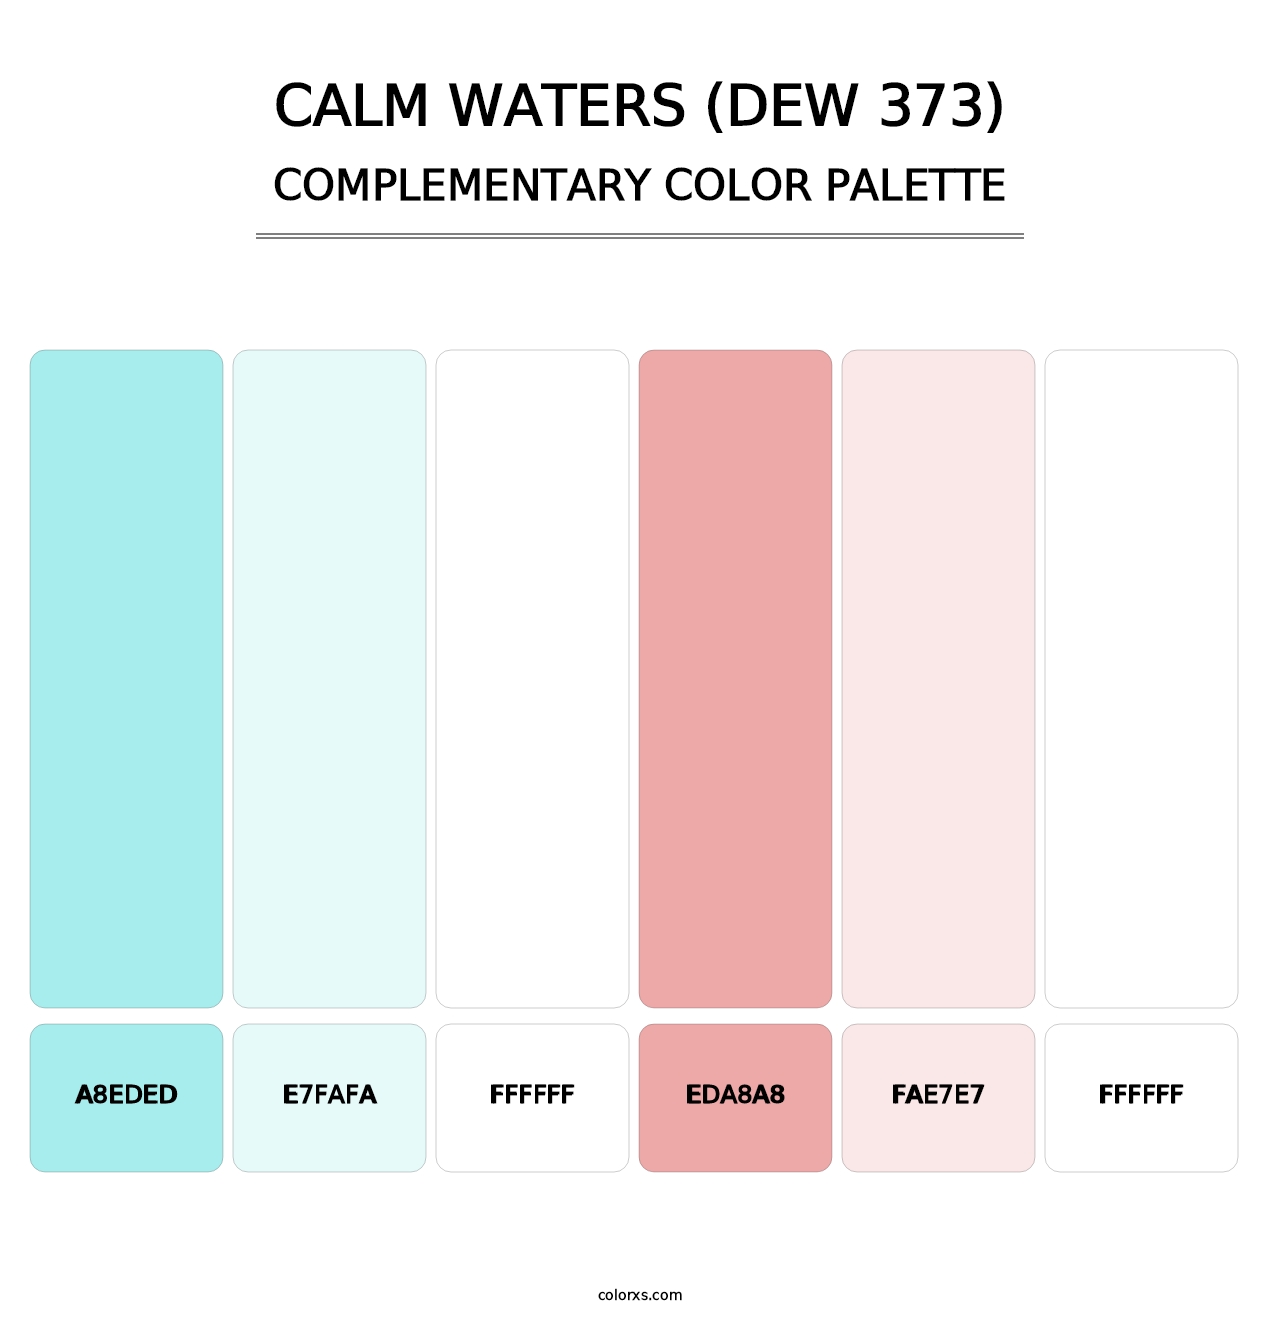 Calm Waters (DEW 373) - Complementary Color Palette